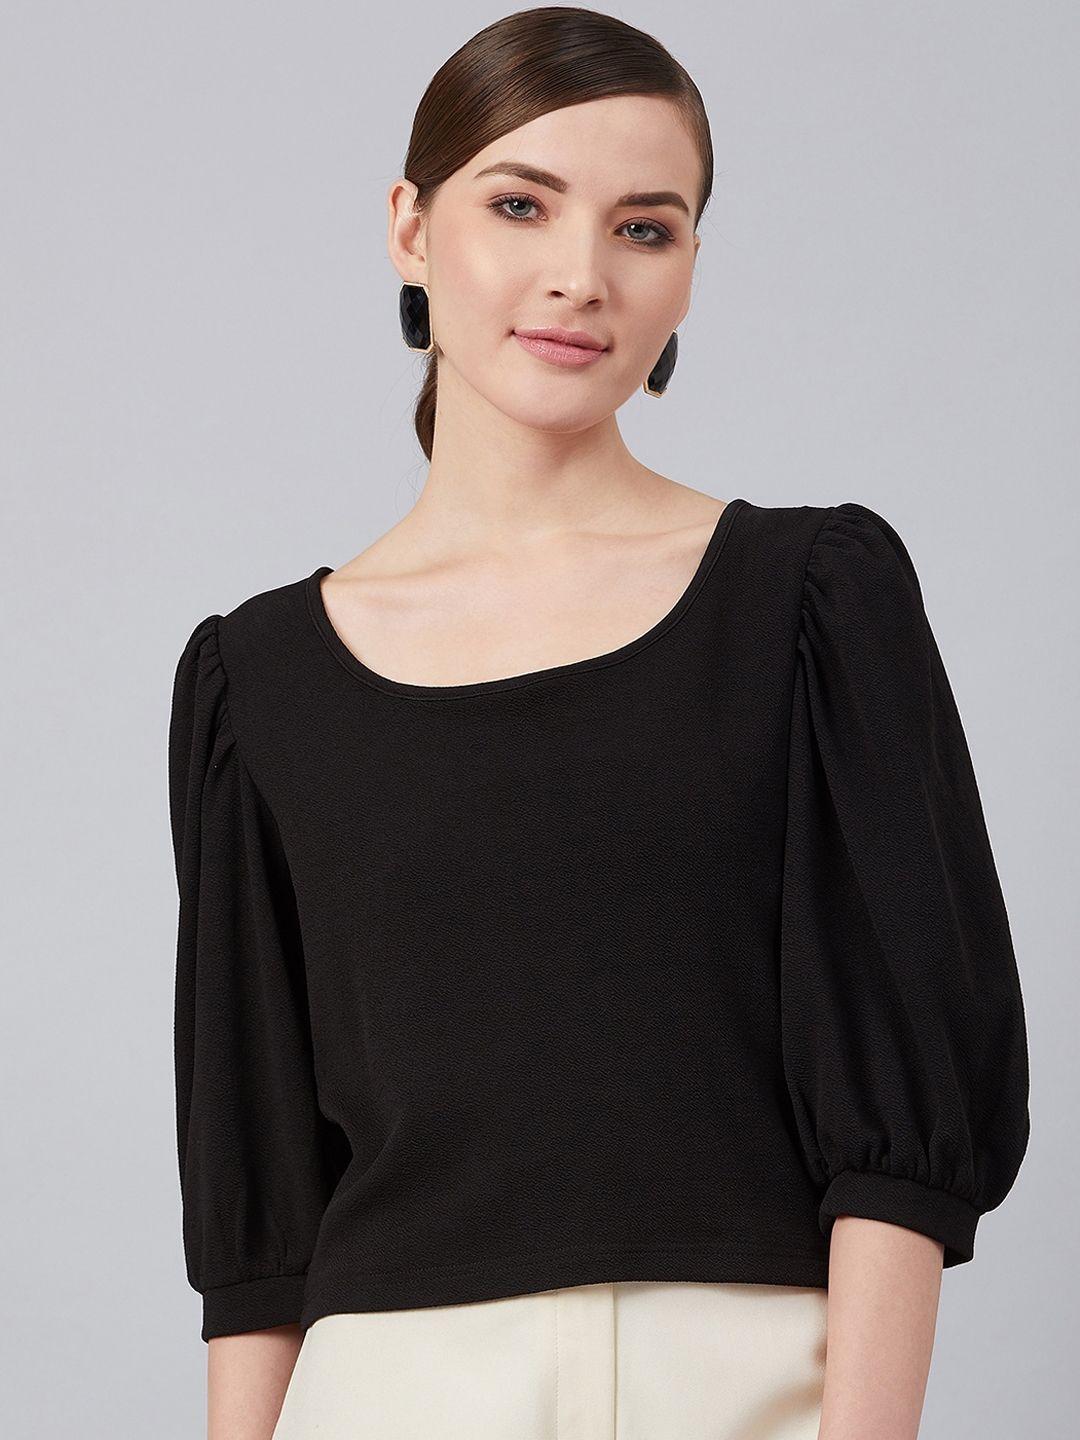 marie claire women black solid top